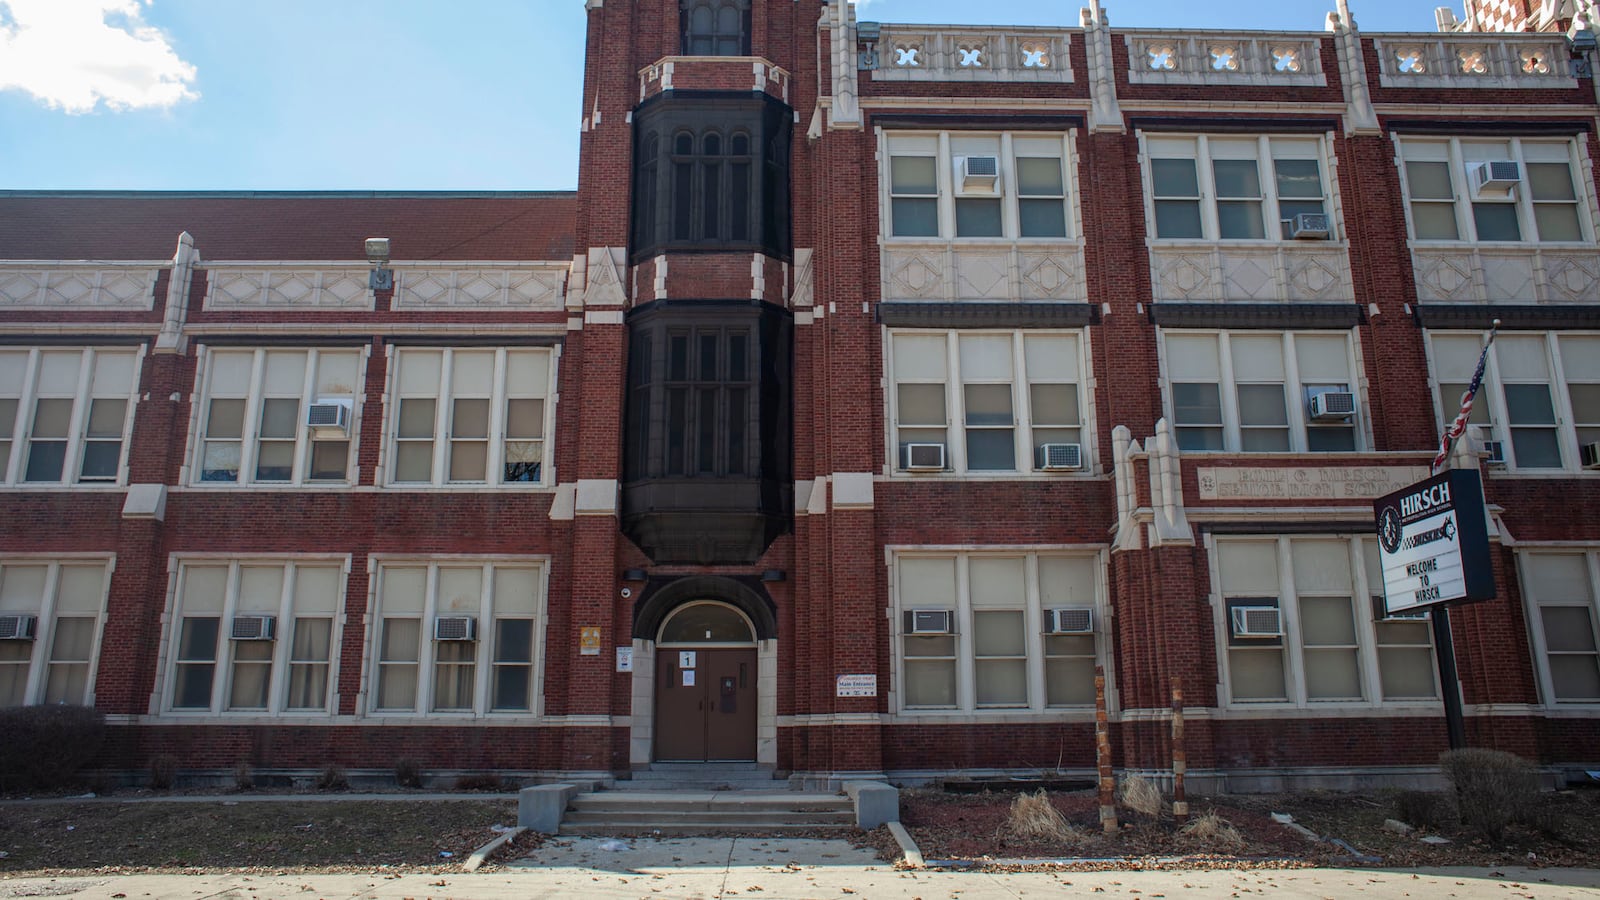 Exterior view of Emil G. Hirsch Metropolitan High School, a public 4–year high school located in the Greater Grand Crossing neighborhood on the south side of Chicago. Hirsch is an underenrolled high school and one of the recipients of the school district's "equity grants" for schools with low enrollment.